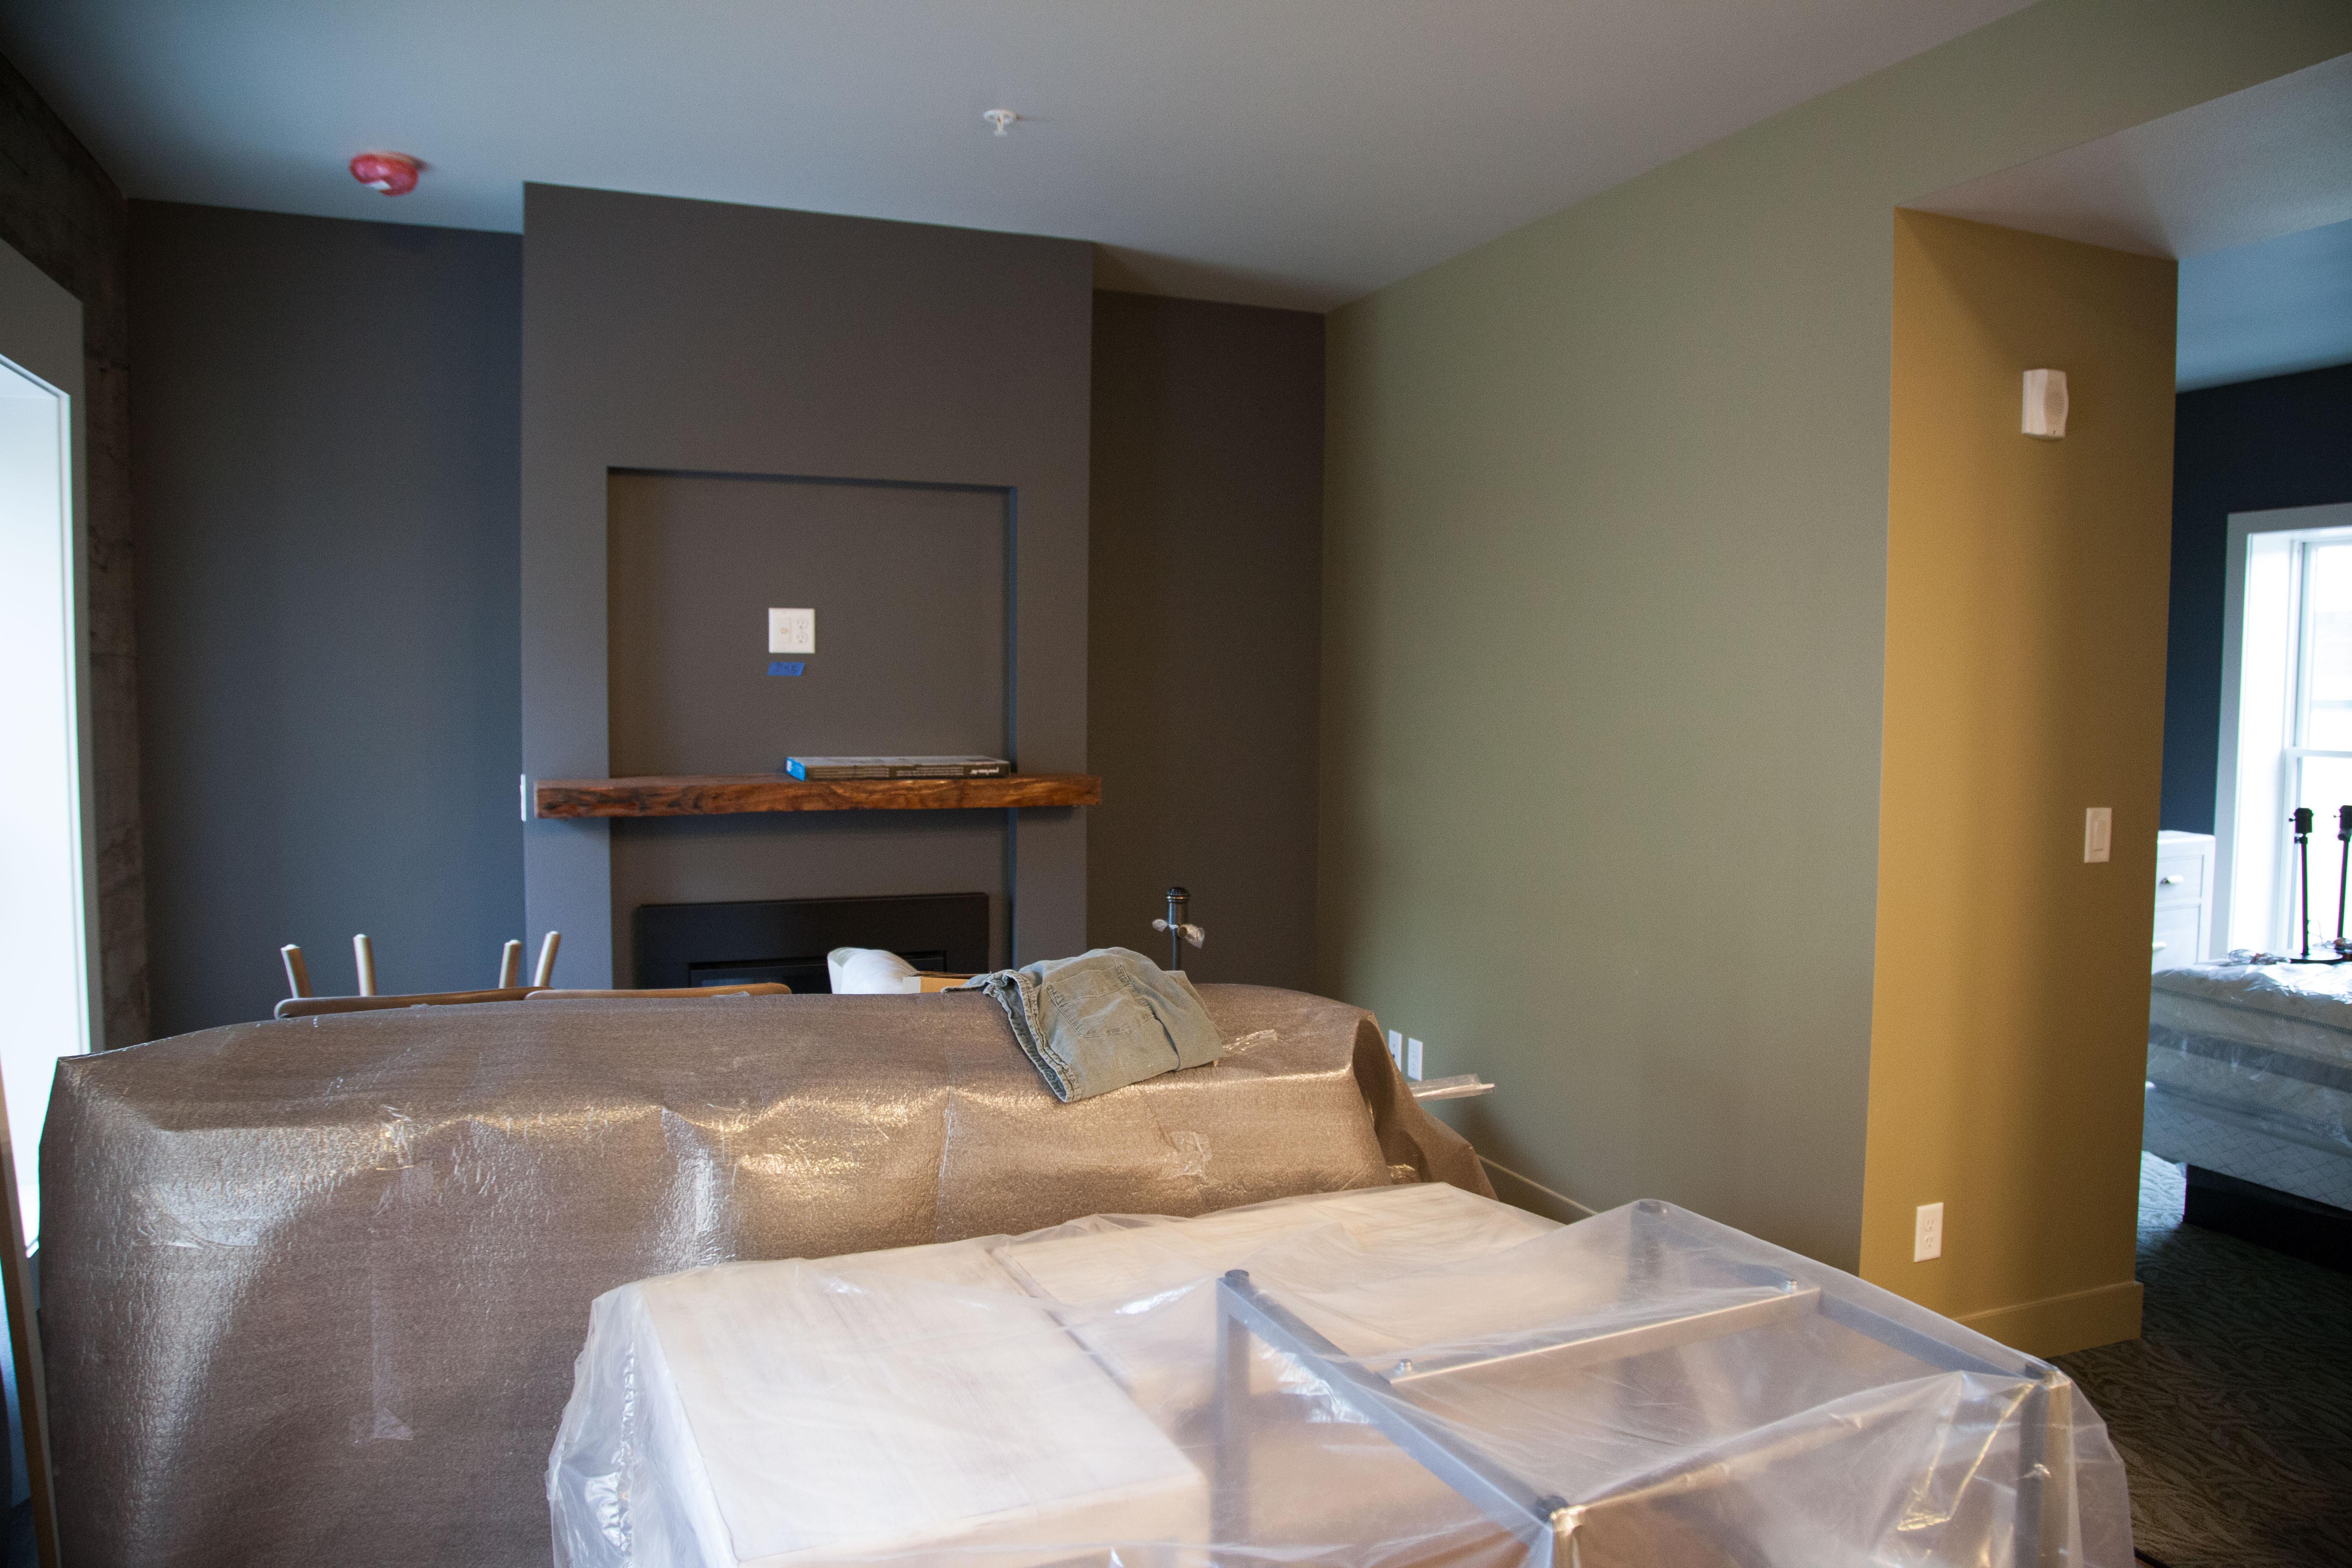 Extended stay Skywell room has its own fireplace, blocked by still-wrapped furnishings.